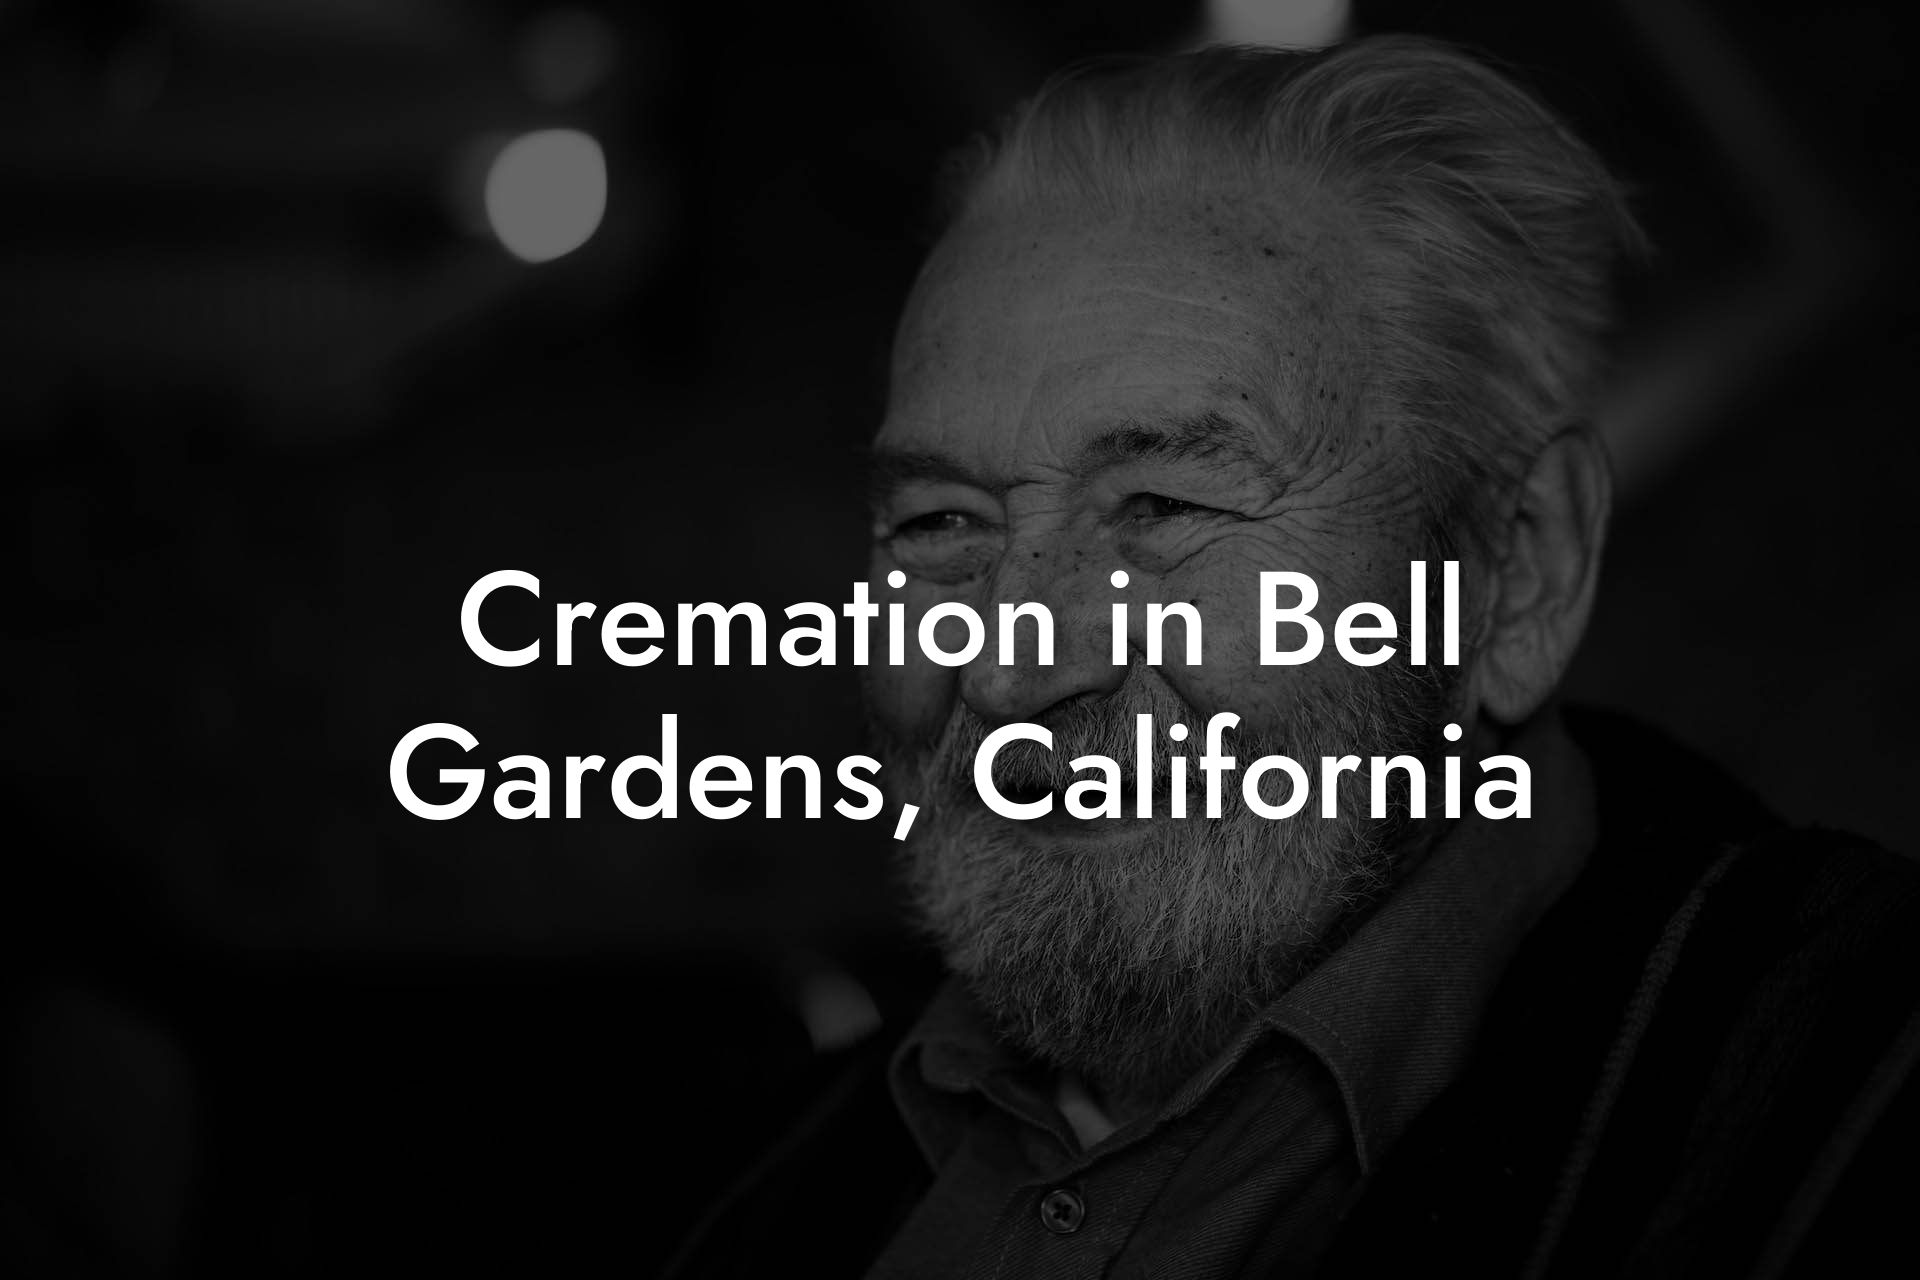 Cremation in Bell Gardens, California